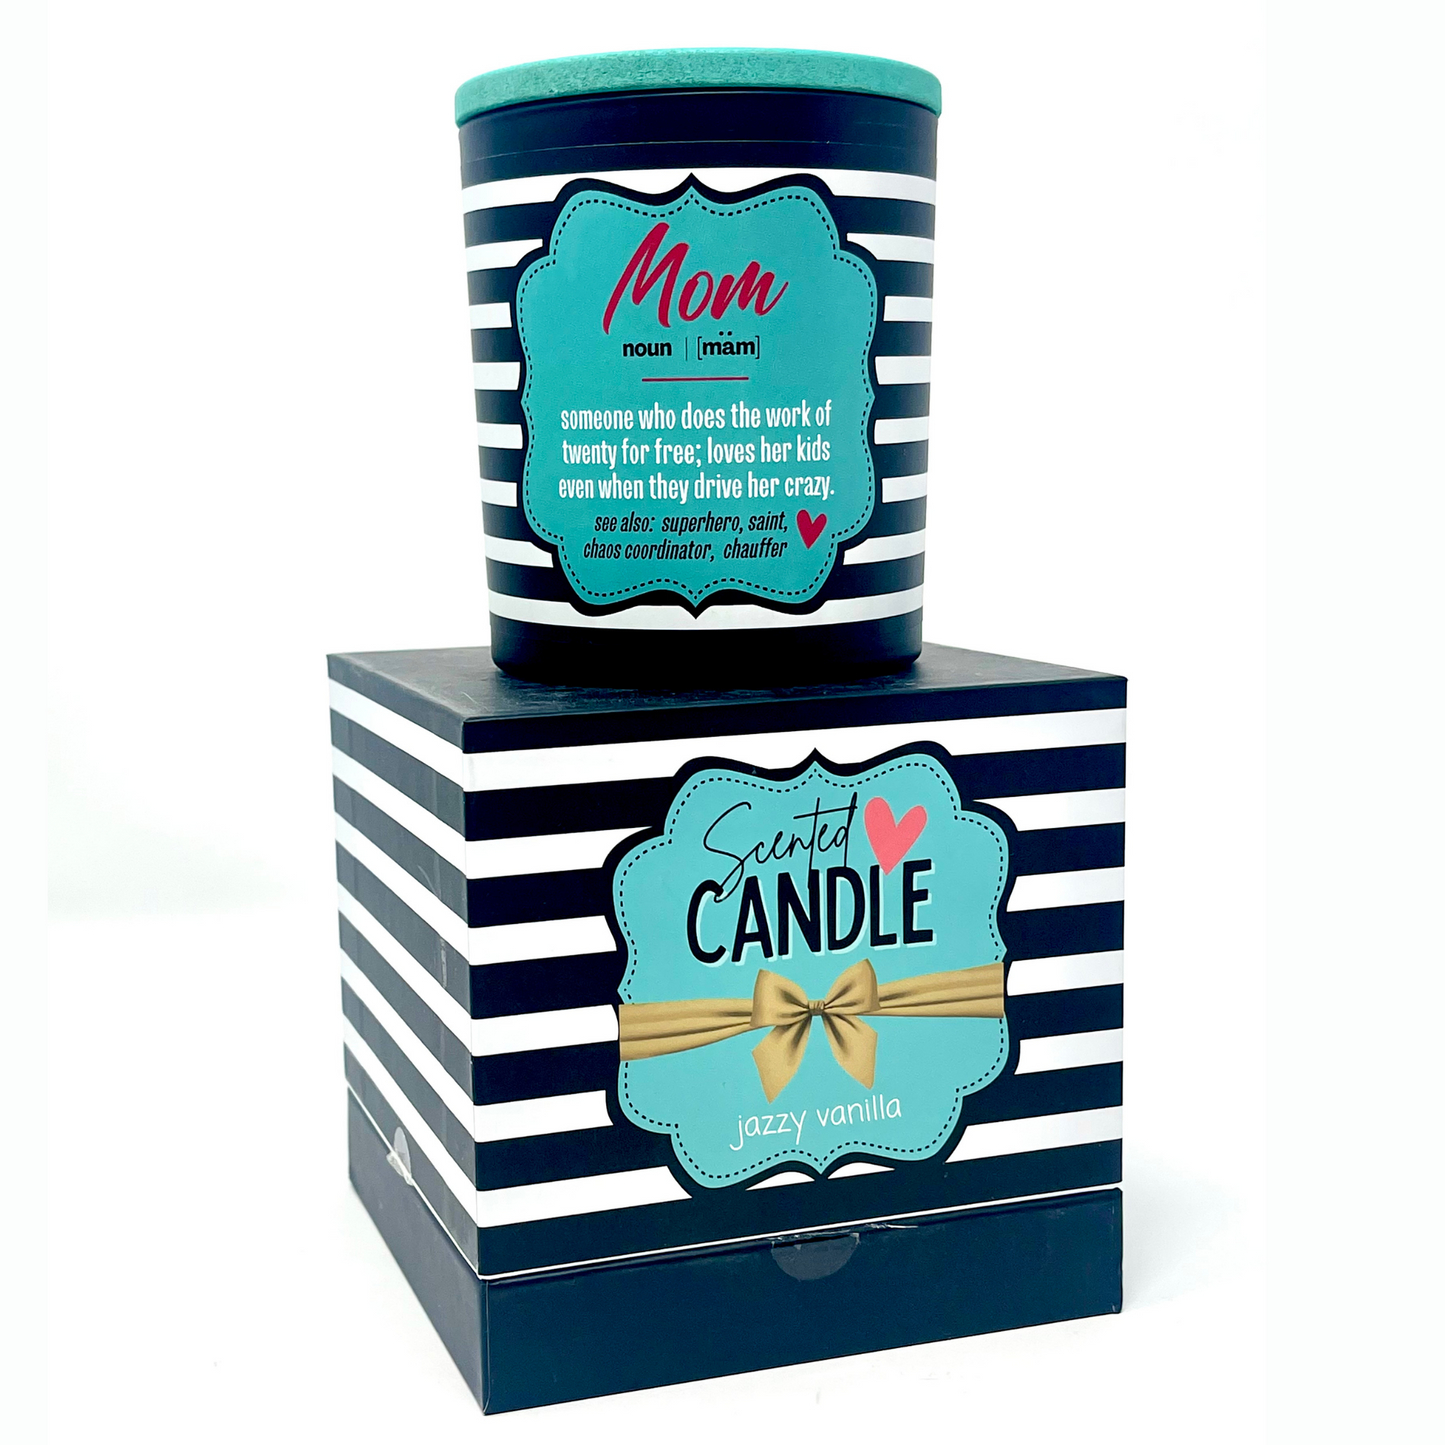 Mom Definition 8 oz Jasmine and Vanilla Scented Candle